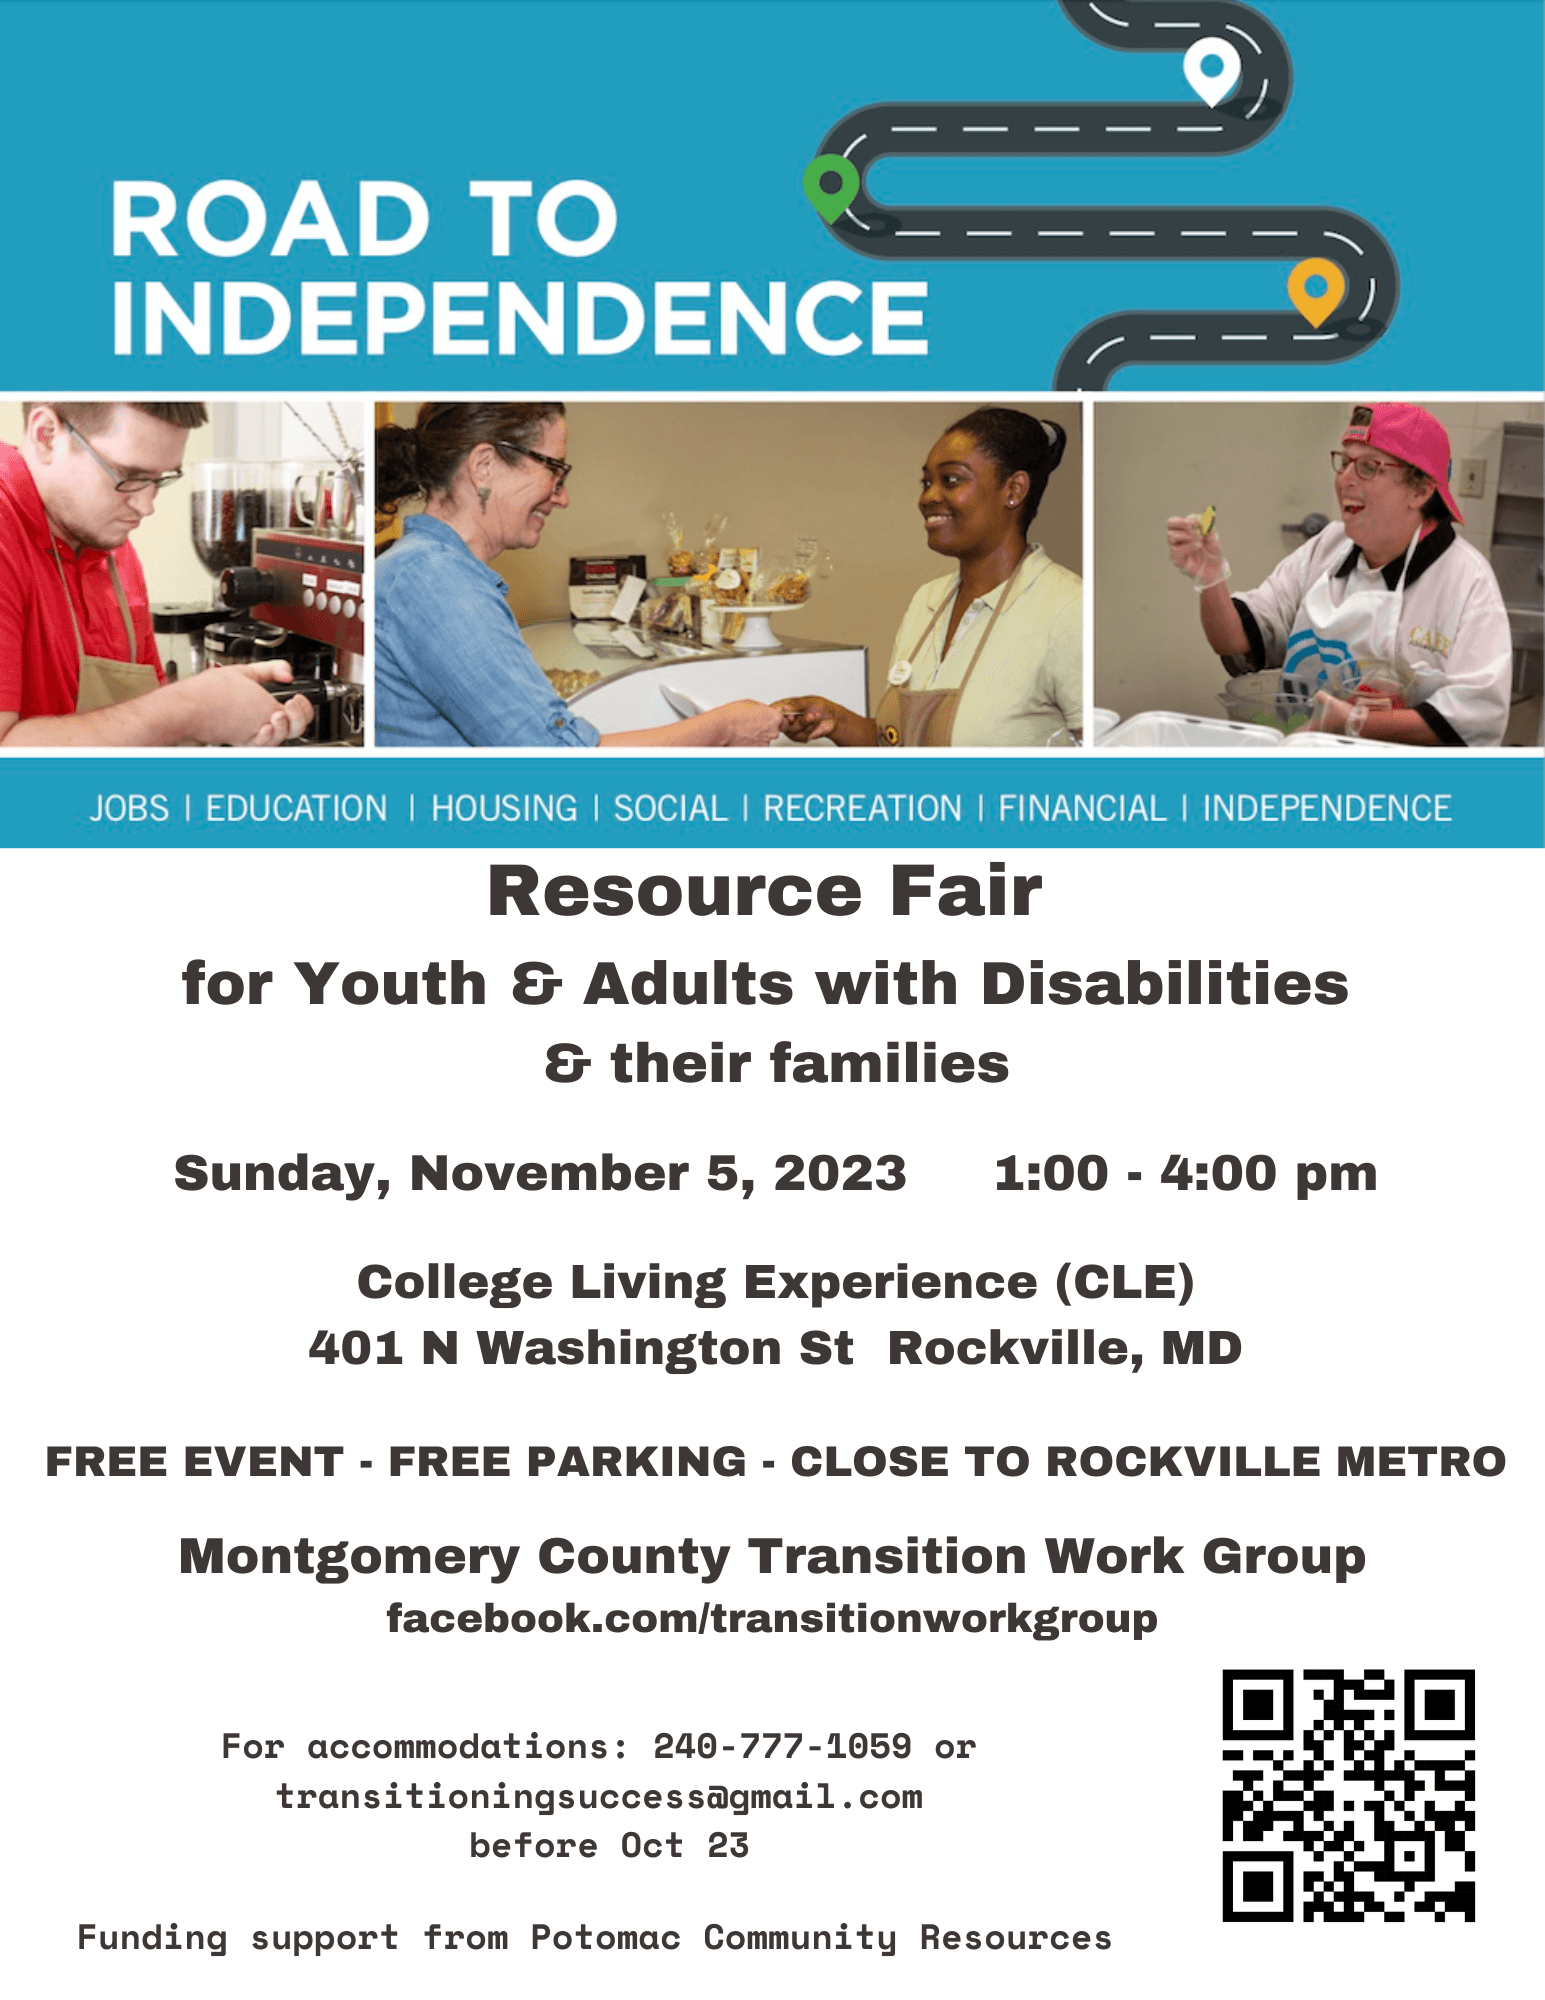 Road to Independence Resource Fair